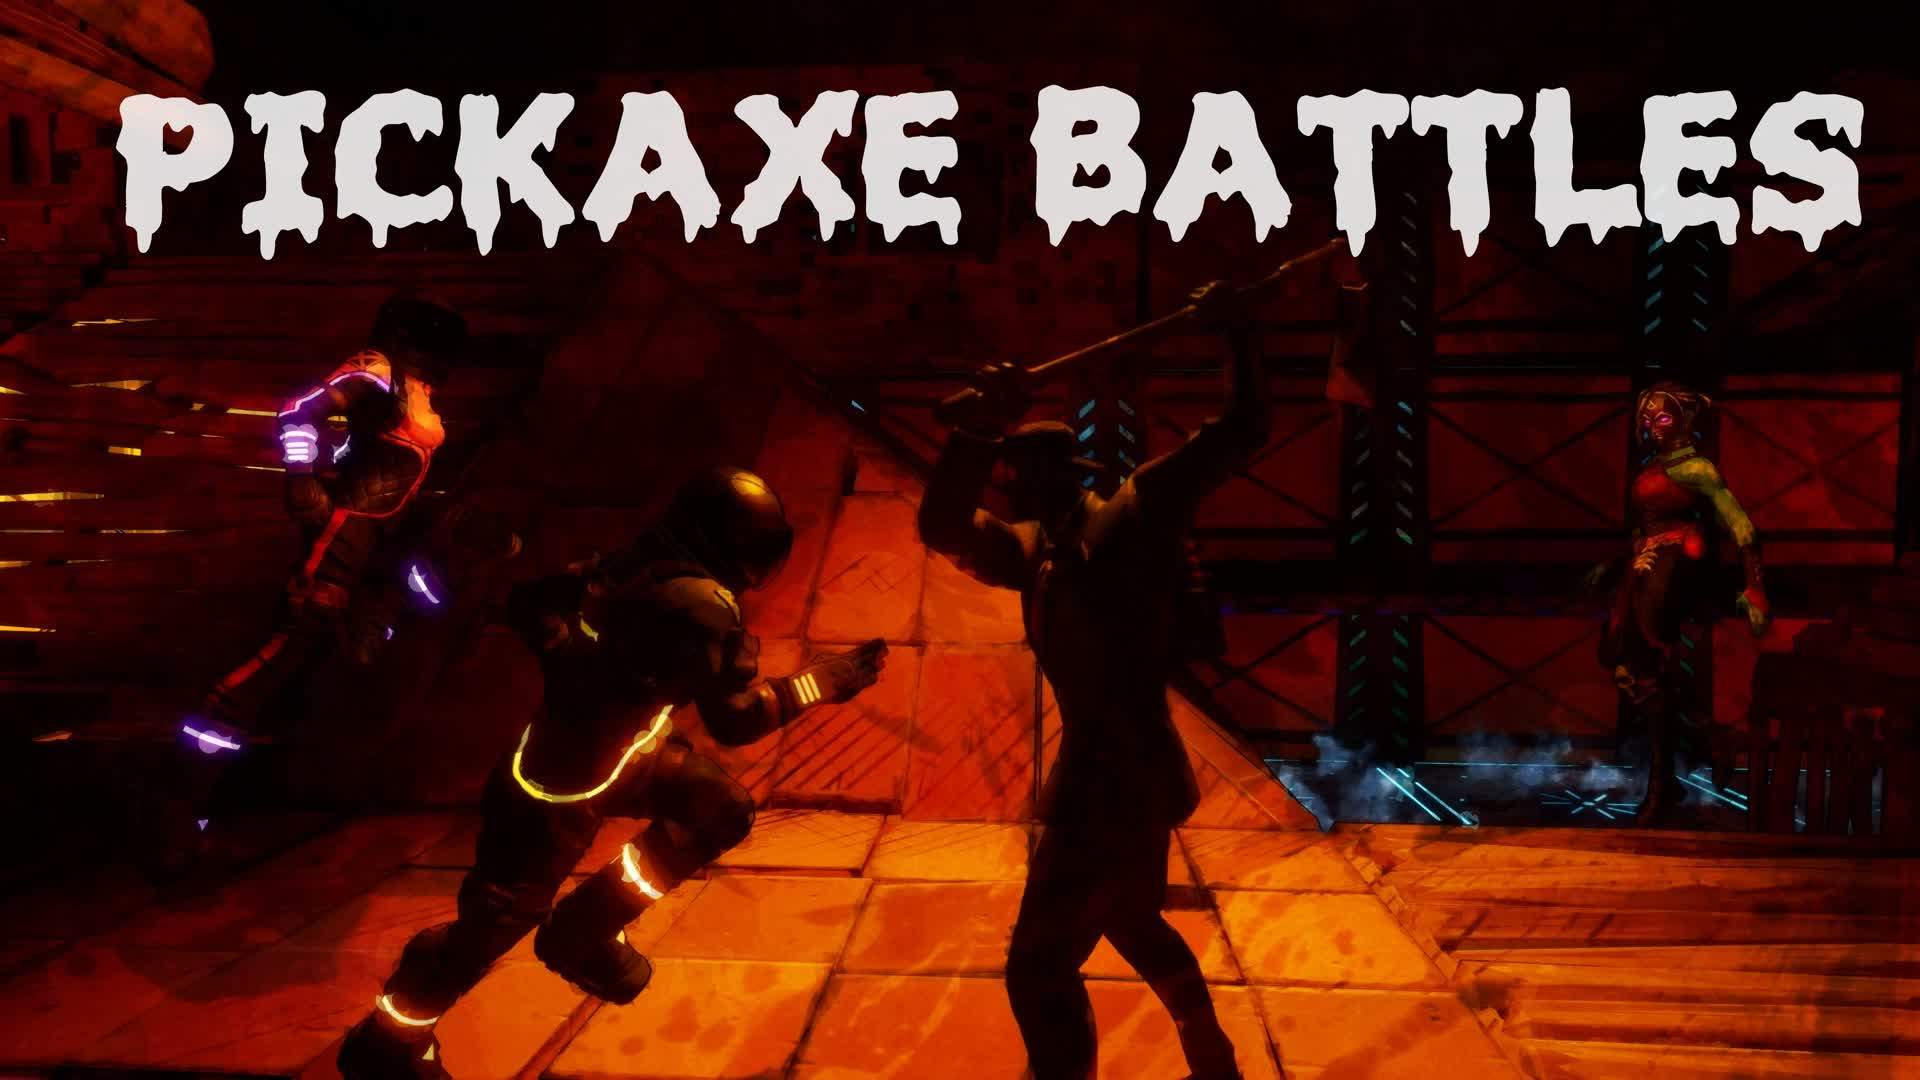 PICKAXE FIGHT